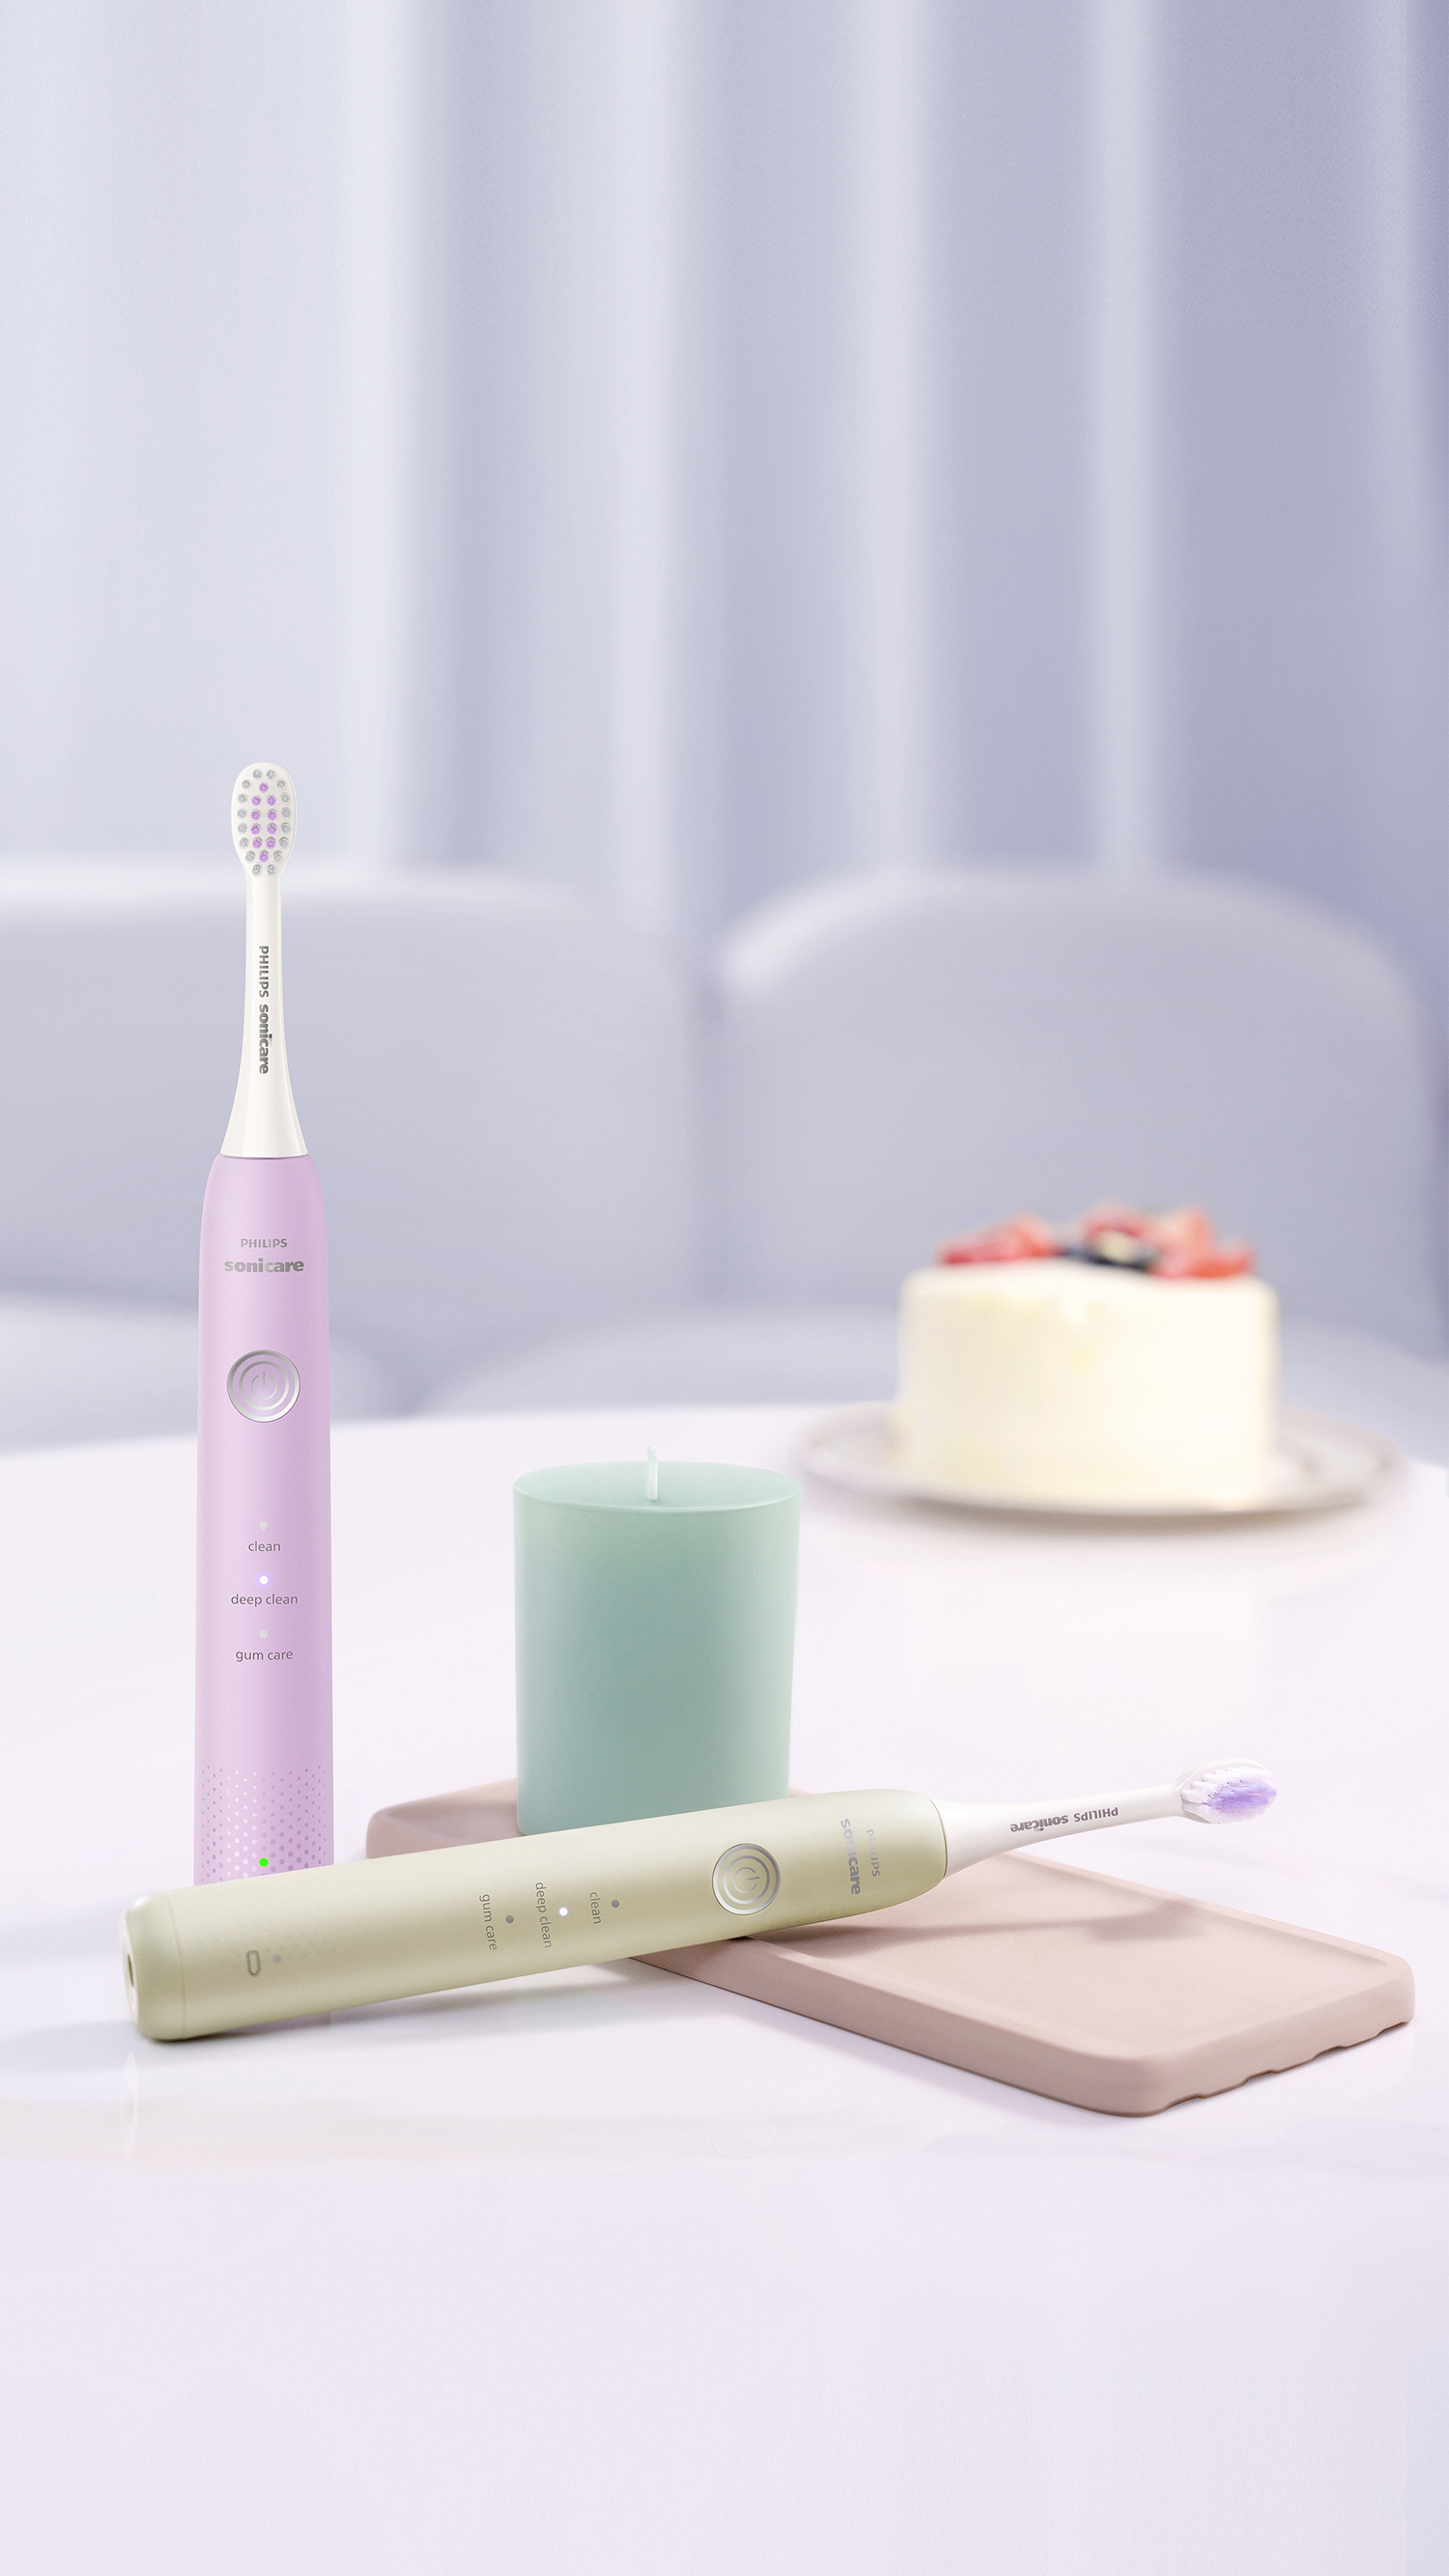 Philips Sonicare 2600 Series Electric Toothbrush